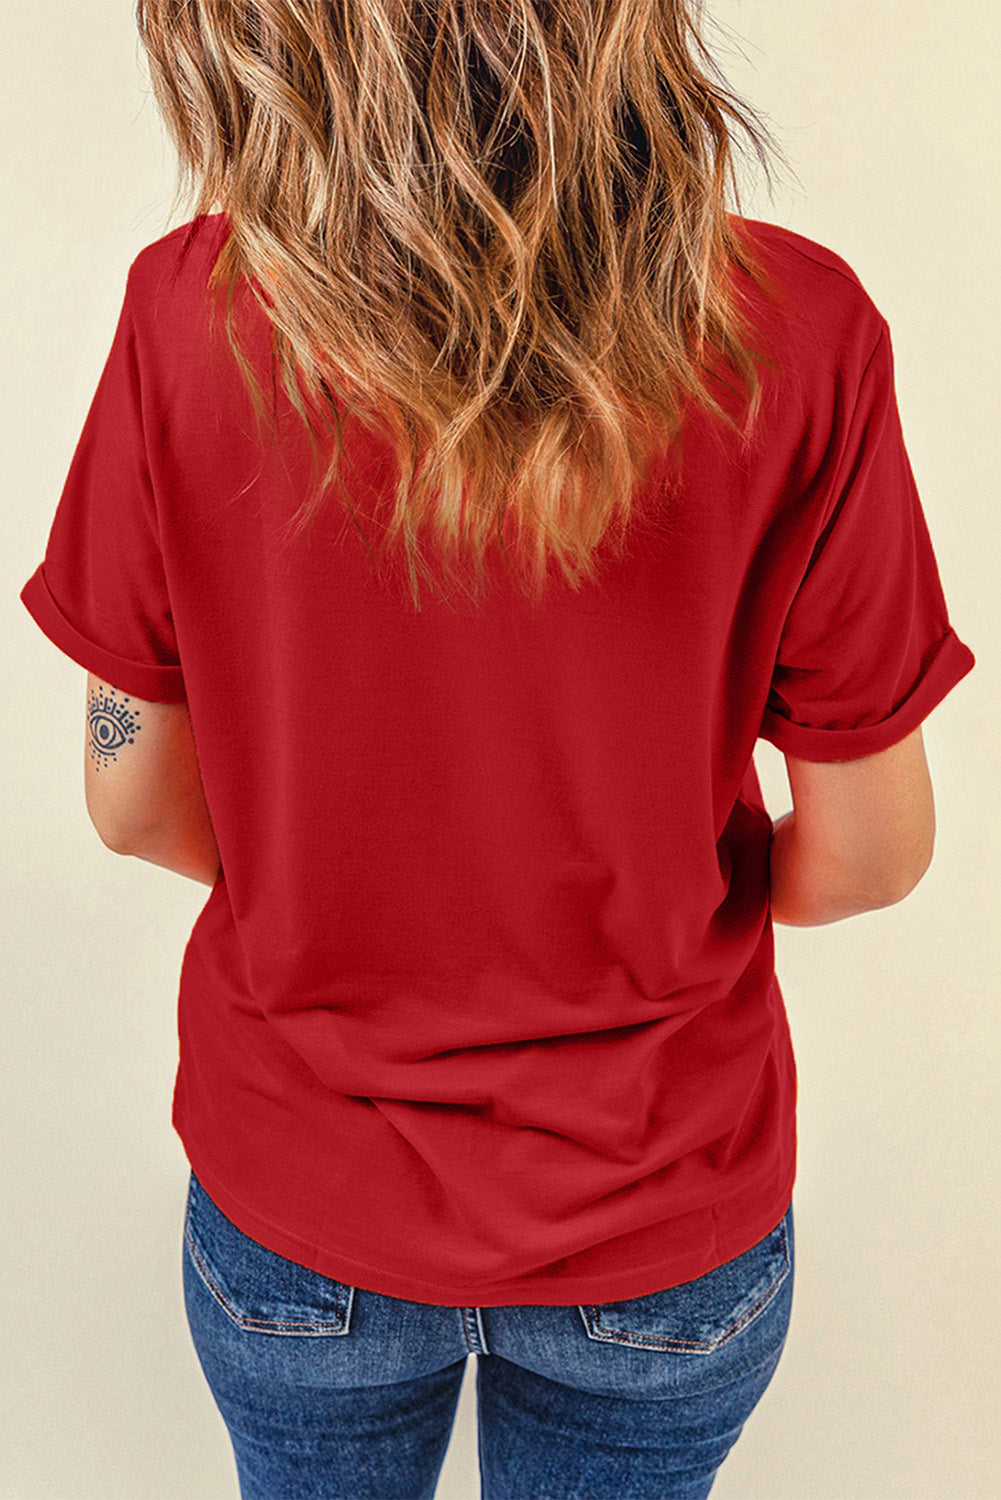 Red Sequined LOVE Letter Valentines T-shirt